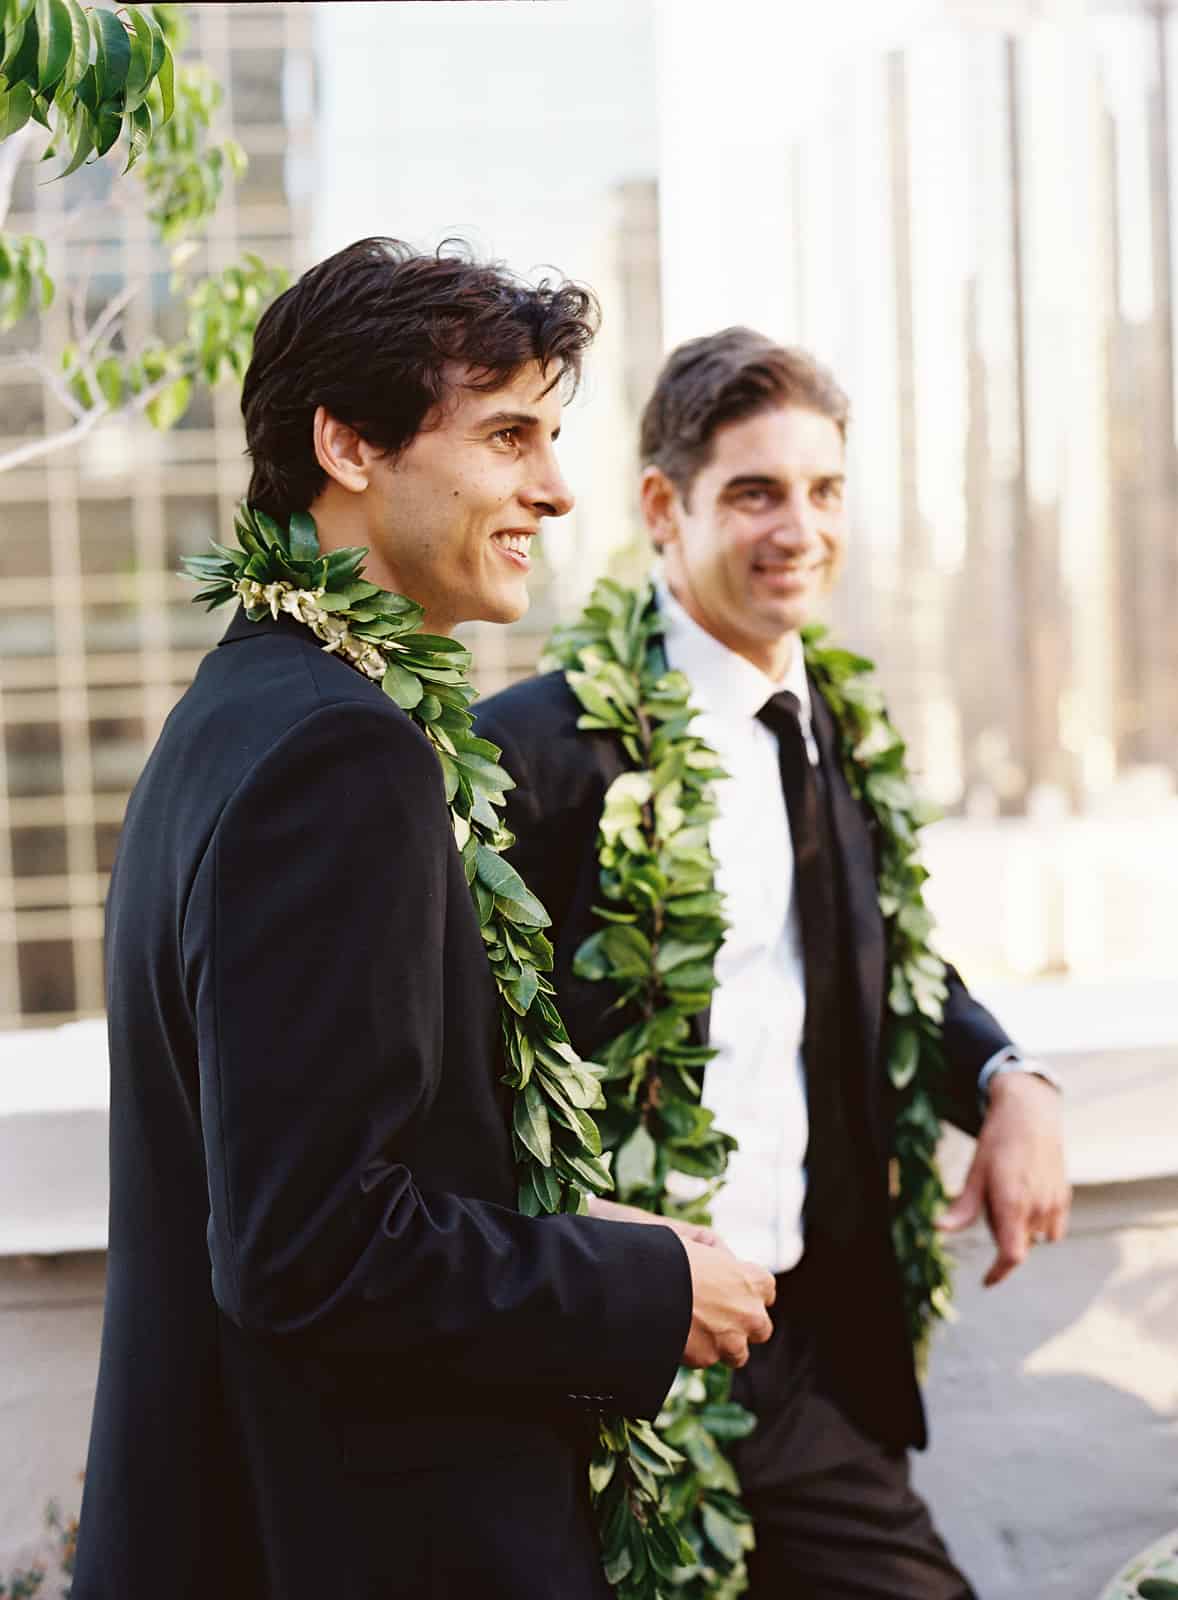 Brothers with ti leaf lei